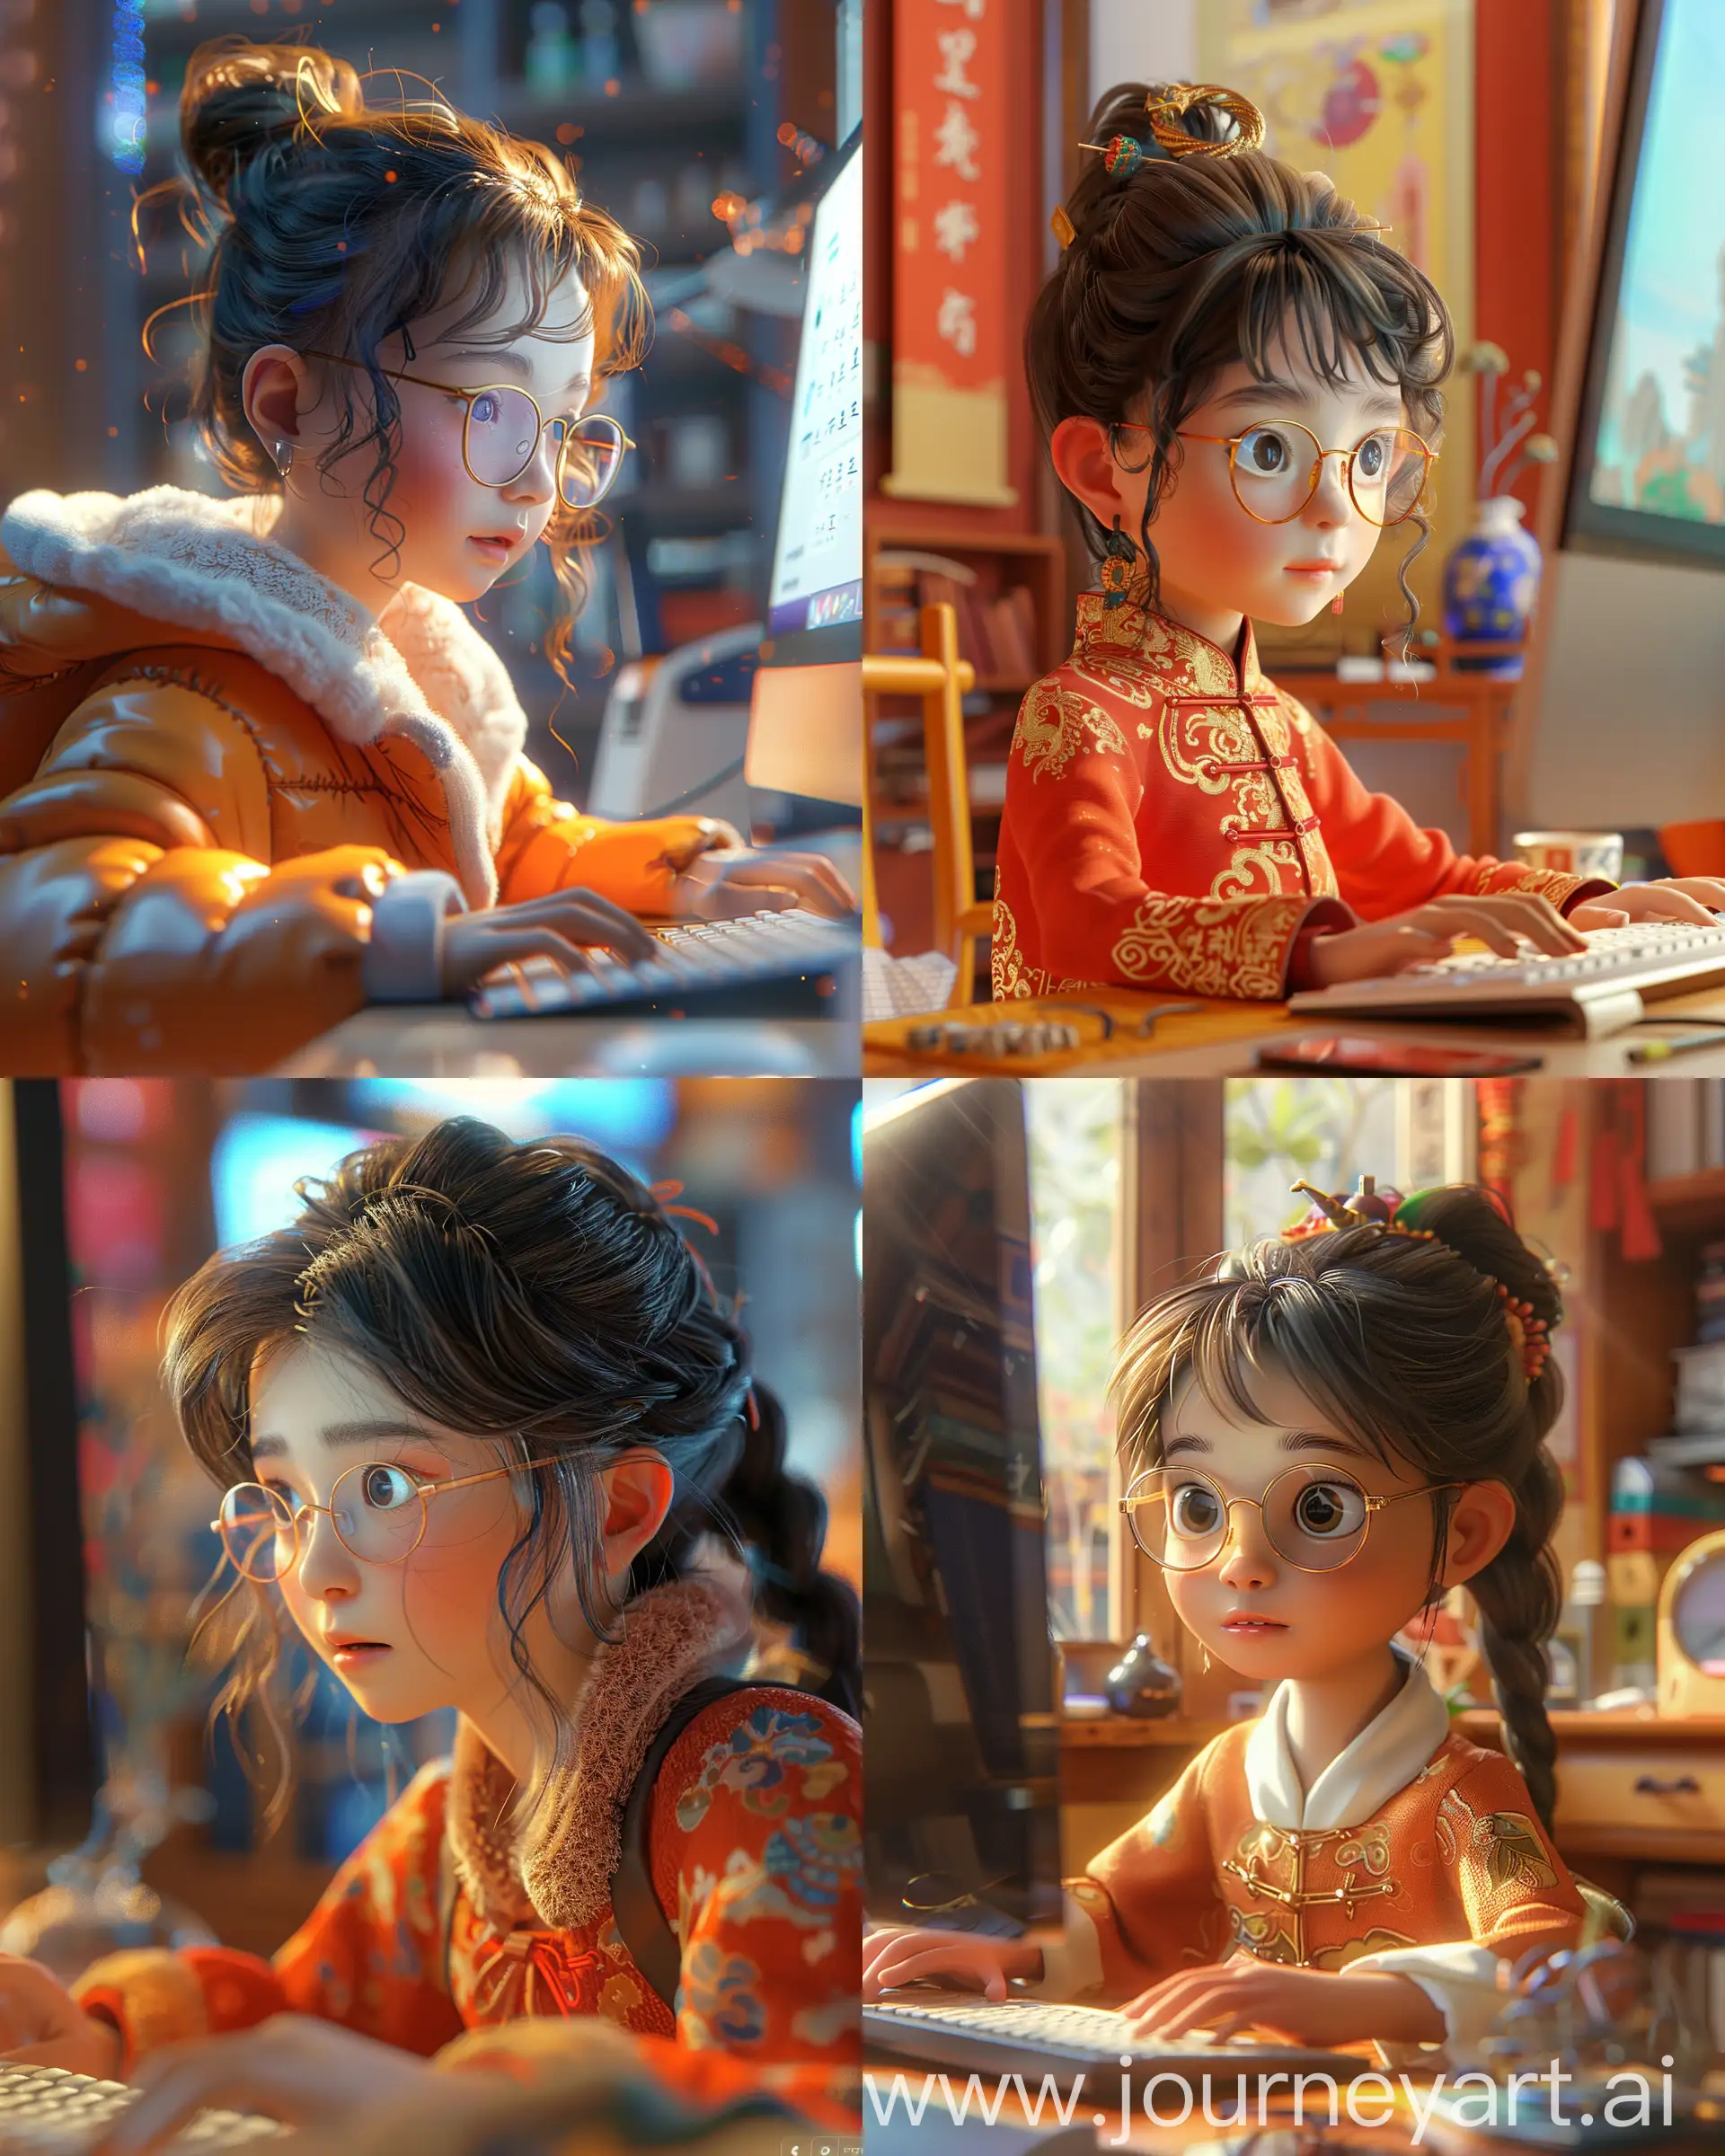 Young-Chinese-Girl-Typing-on-Computer-Quirky-Study-with-Vivid-Colors